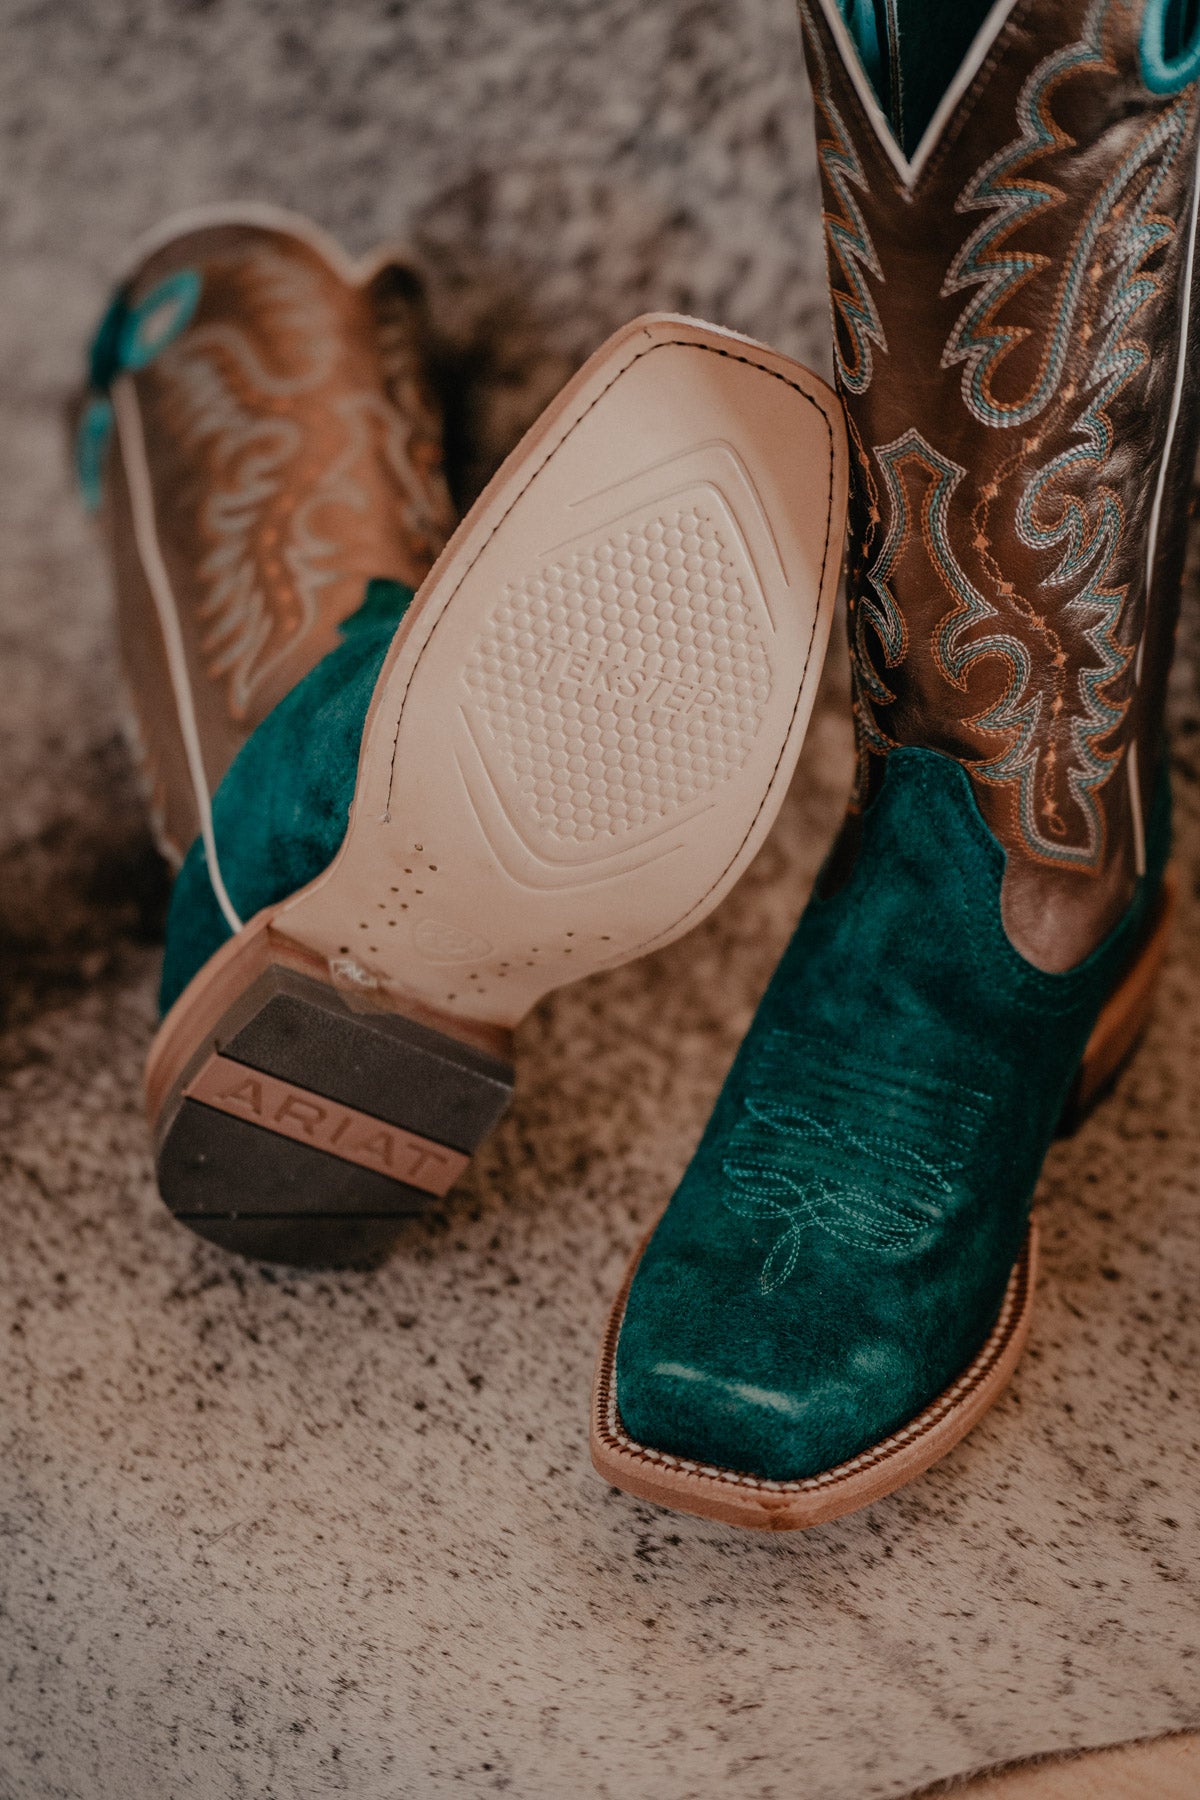 Futurity Boon Western Boot by Ariat (Turquoise Rough Out & Gold)